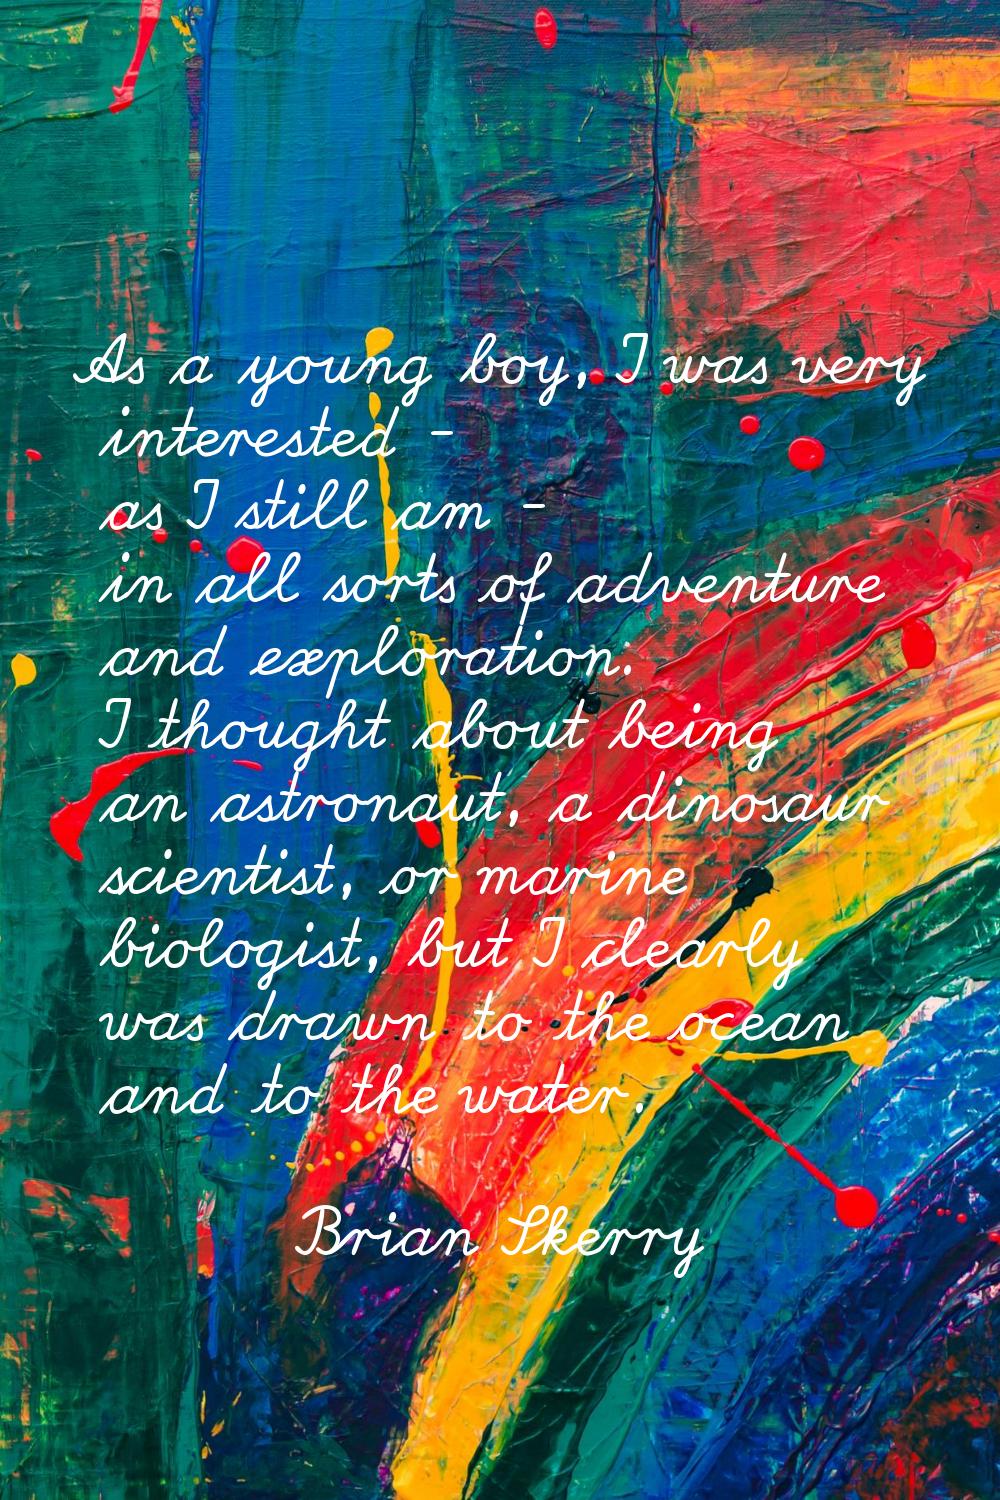 As a young boy, I was very interested - as I still am - in all sorts of adventure and exploration. 